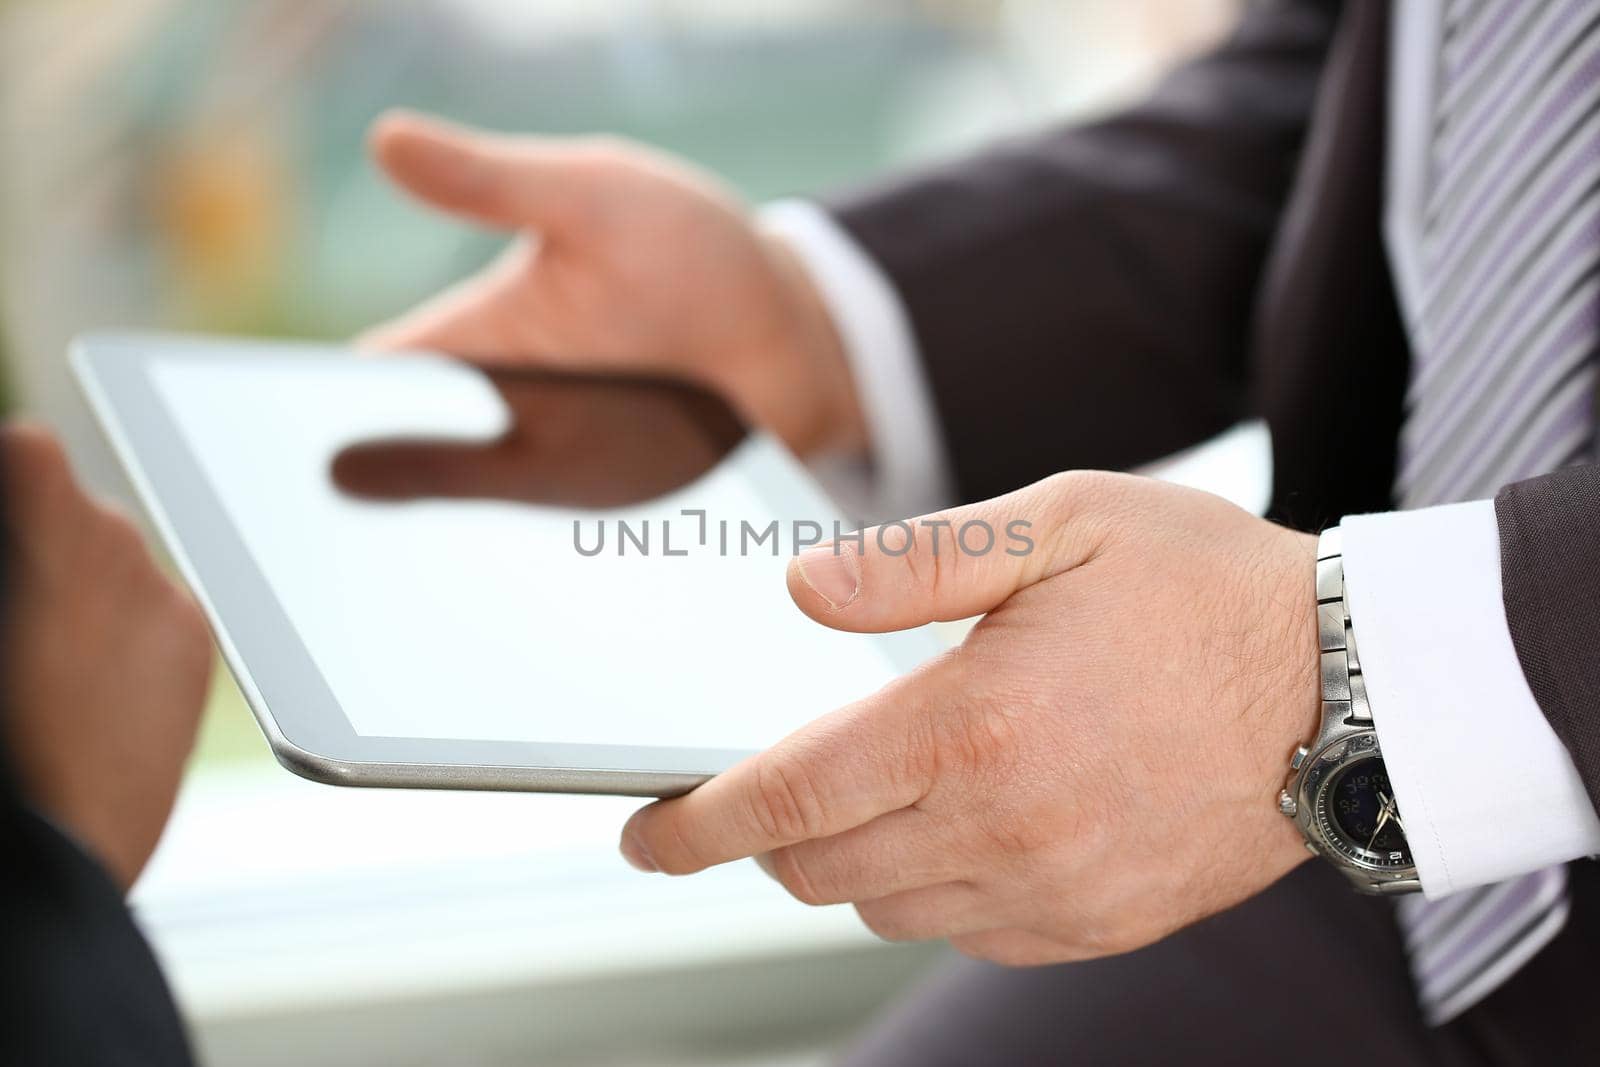 Two businessman are looking and studying statistics on tablet display closeup. Male hand opponent holds pen and points out problem collaboration business coach cooperation partnership palm concept